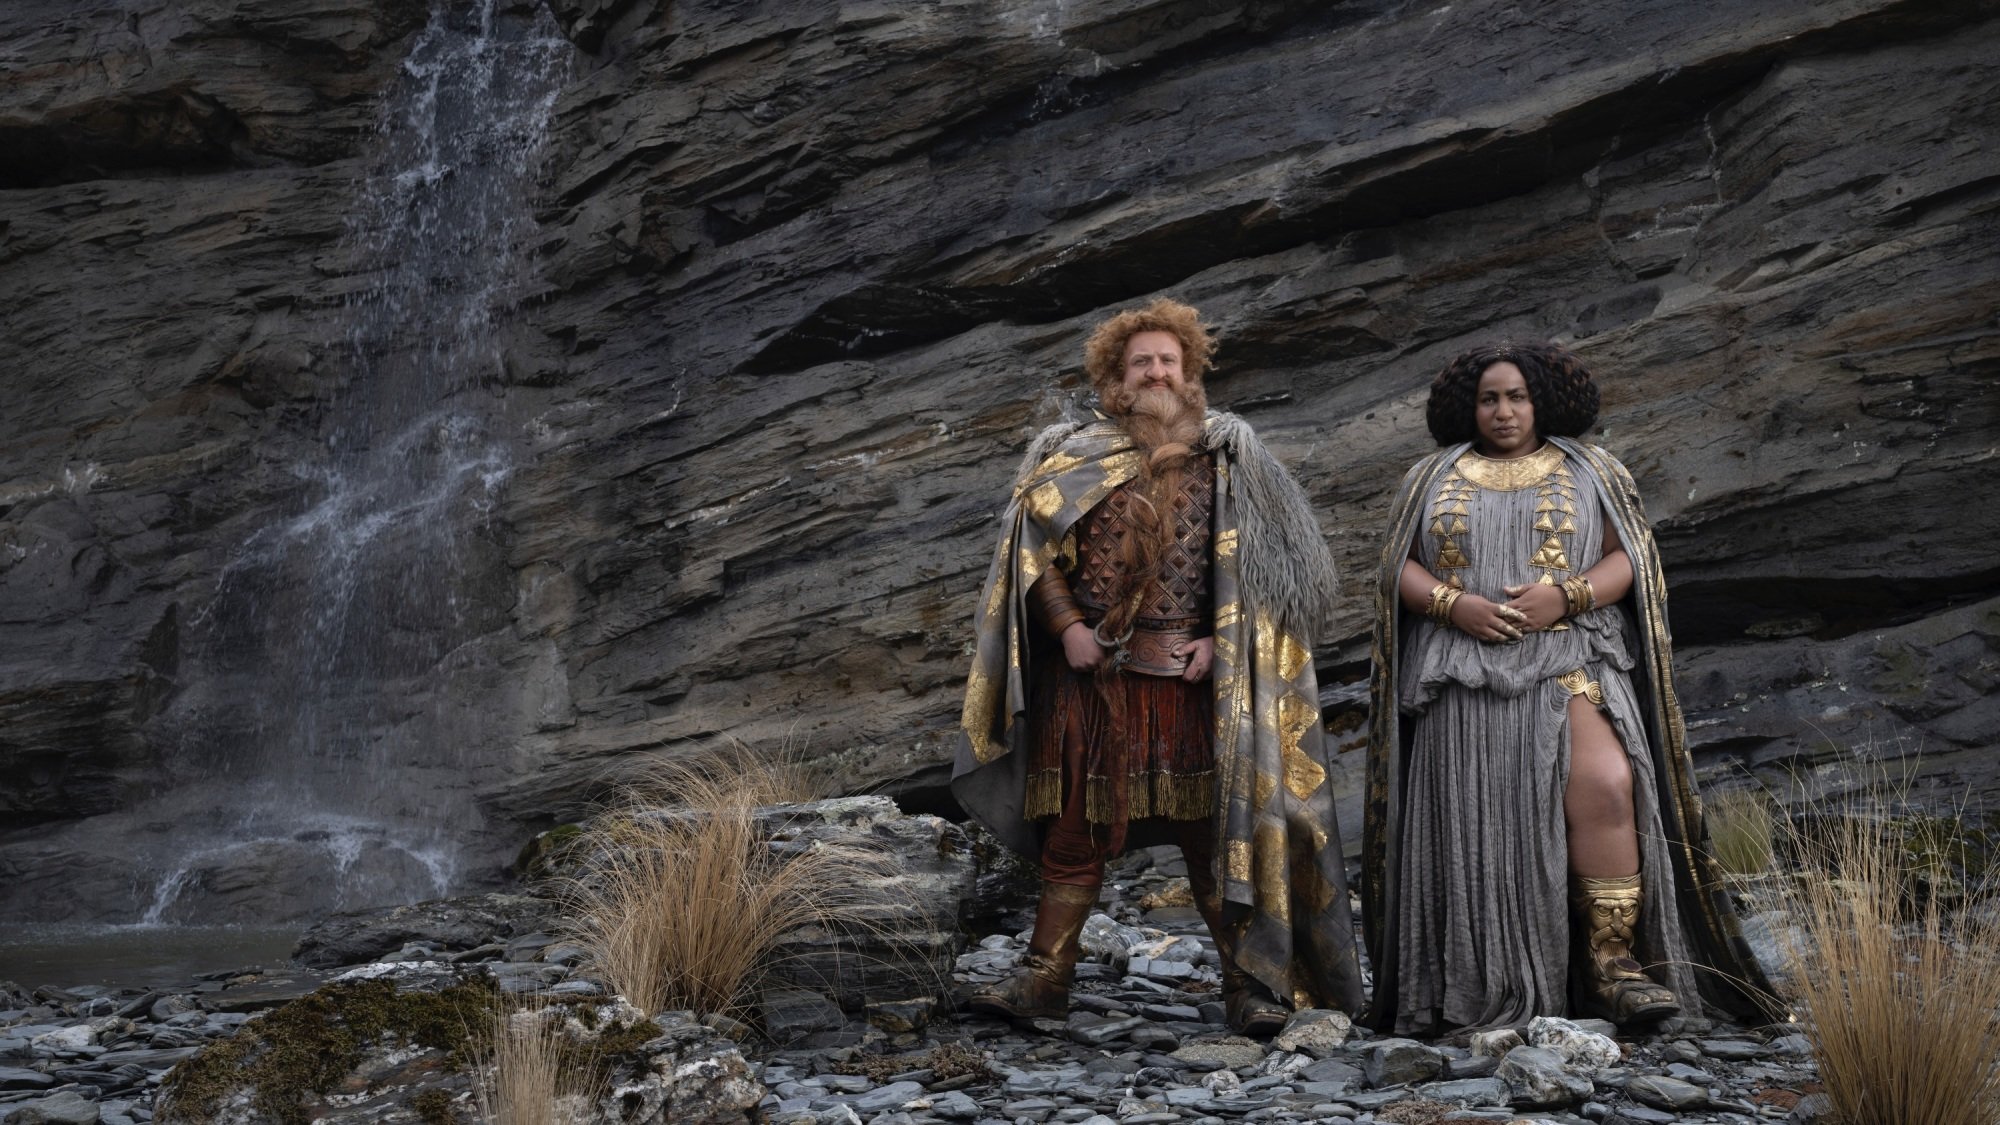 A dwarven man and woman in lavish fantasy clothing and armor stand in front of a rock face with a waterfall falling down it.